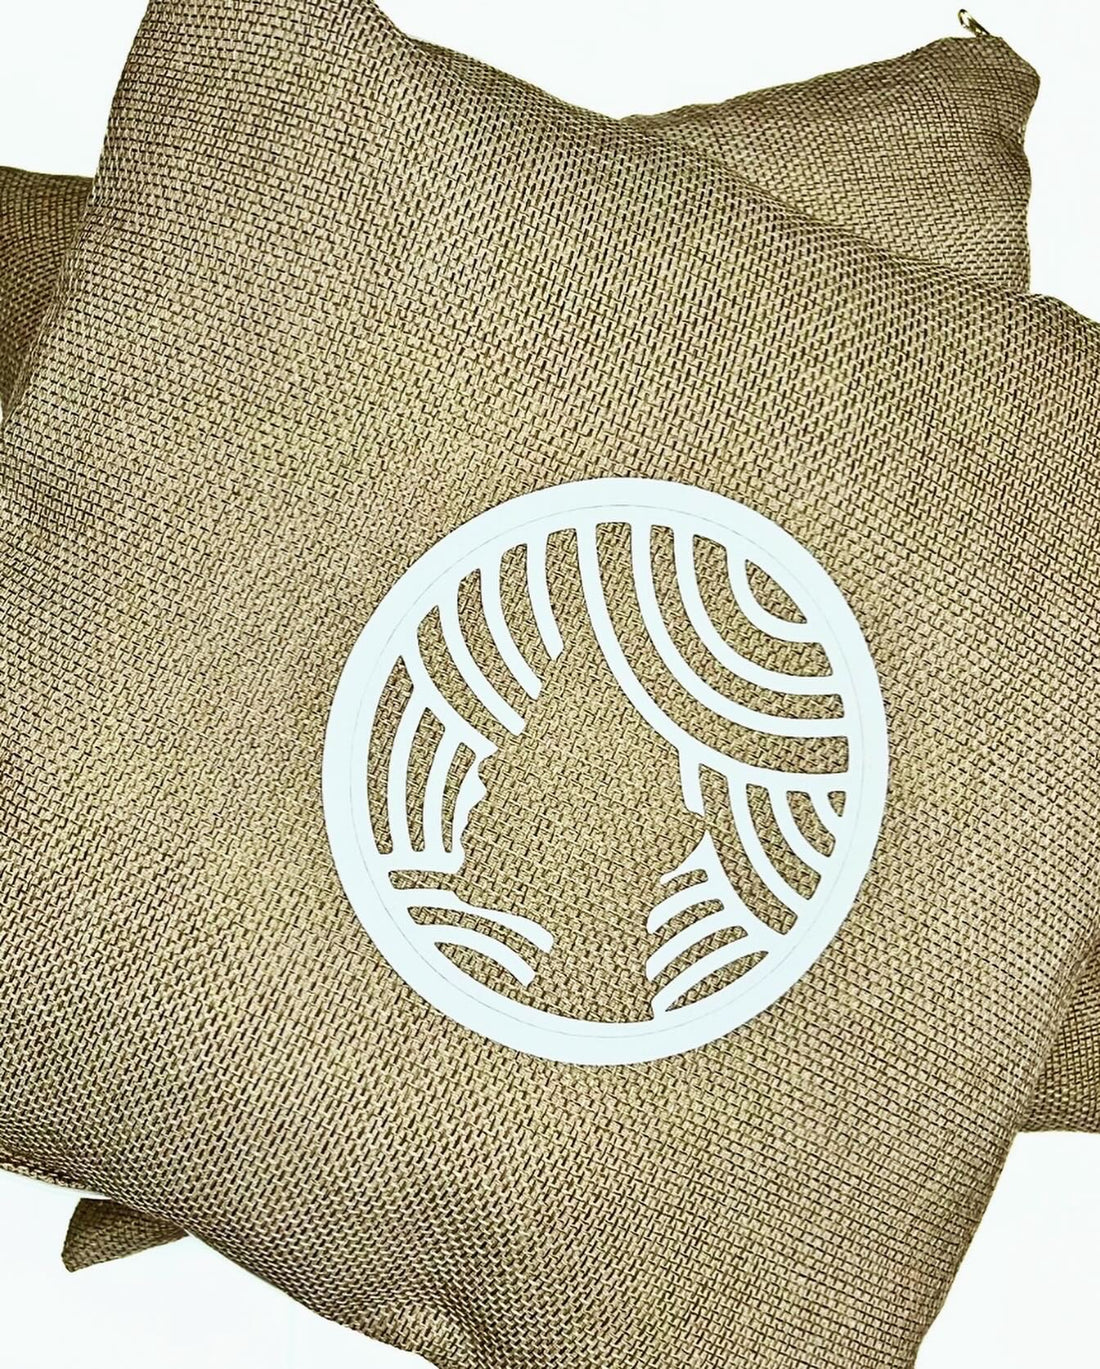 Brown Pillow with white leather